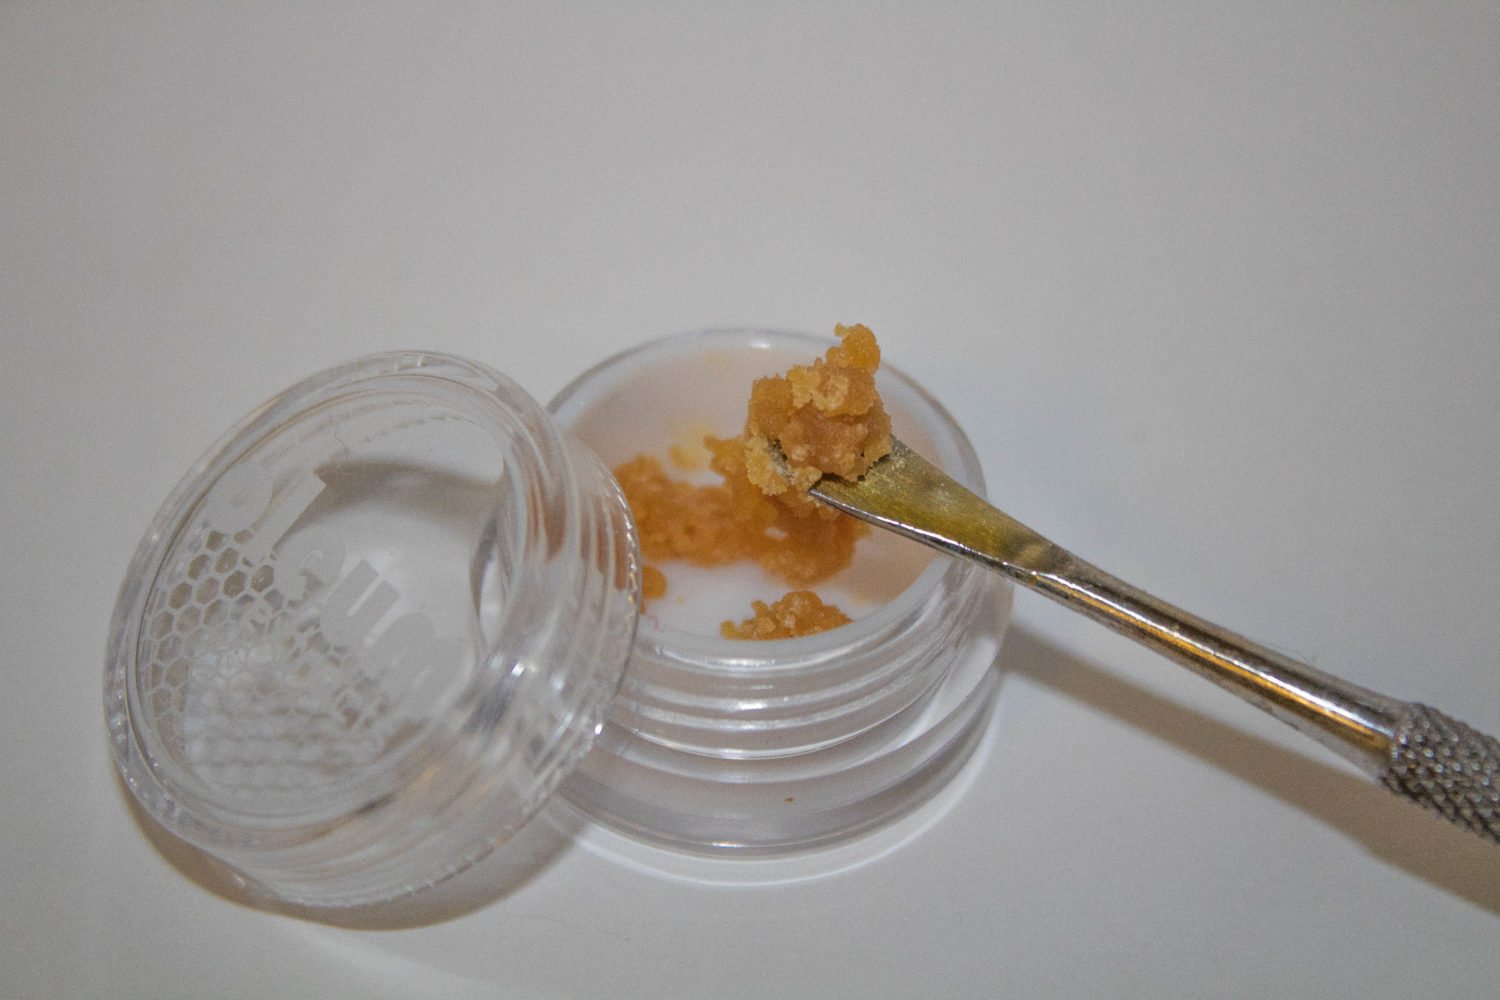 A Real Review of Kimbo Fire From Oleum Extracts